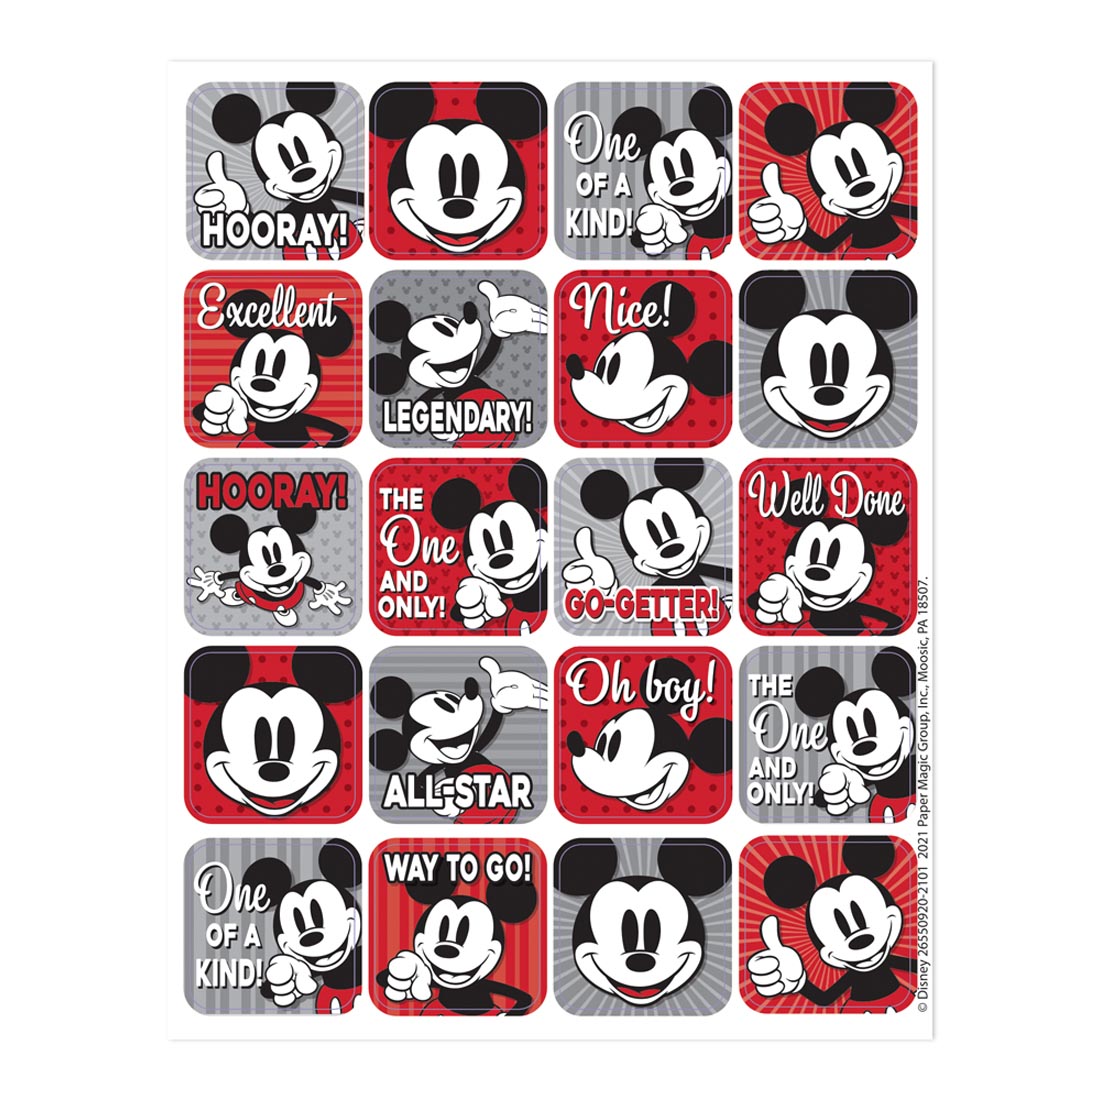 Stickers from the Mickey Mouse Throwback collection by Eureka with sayings like Hooray! One of a Kind! Legendary!